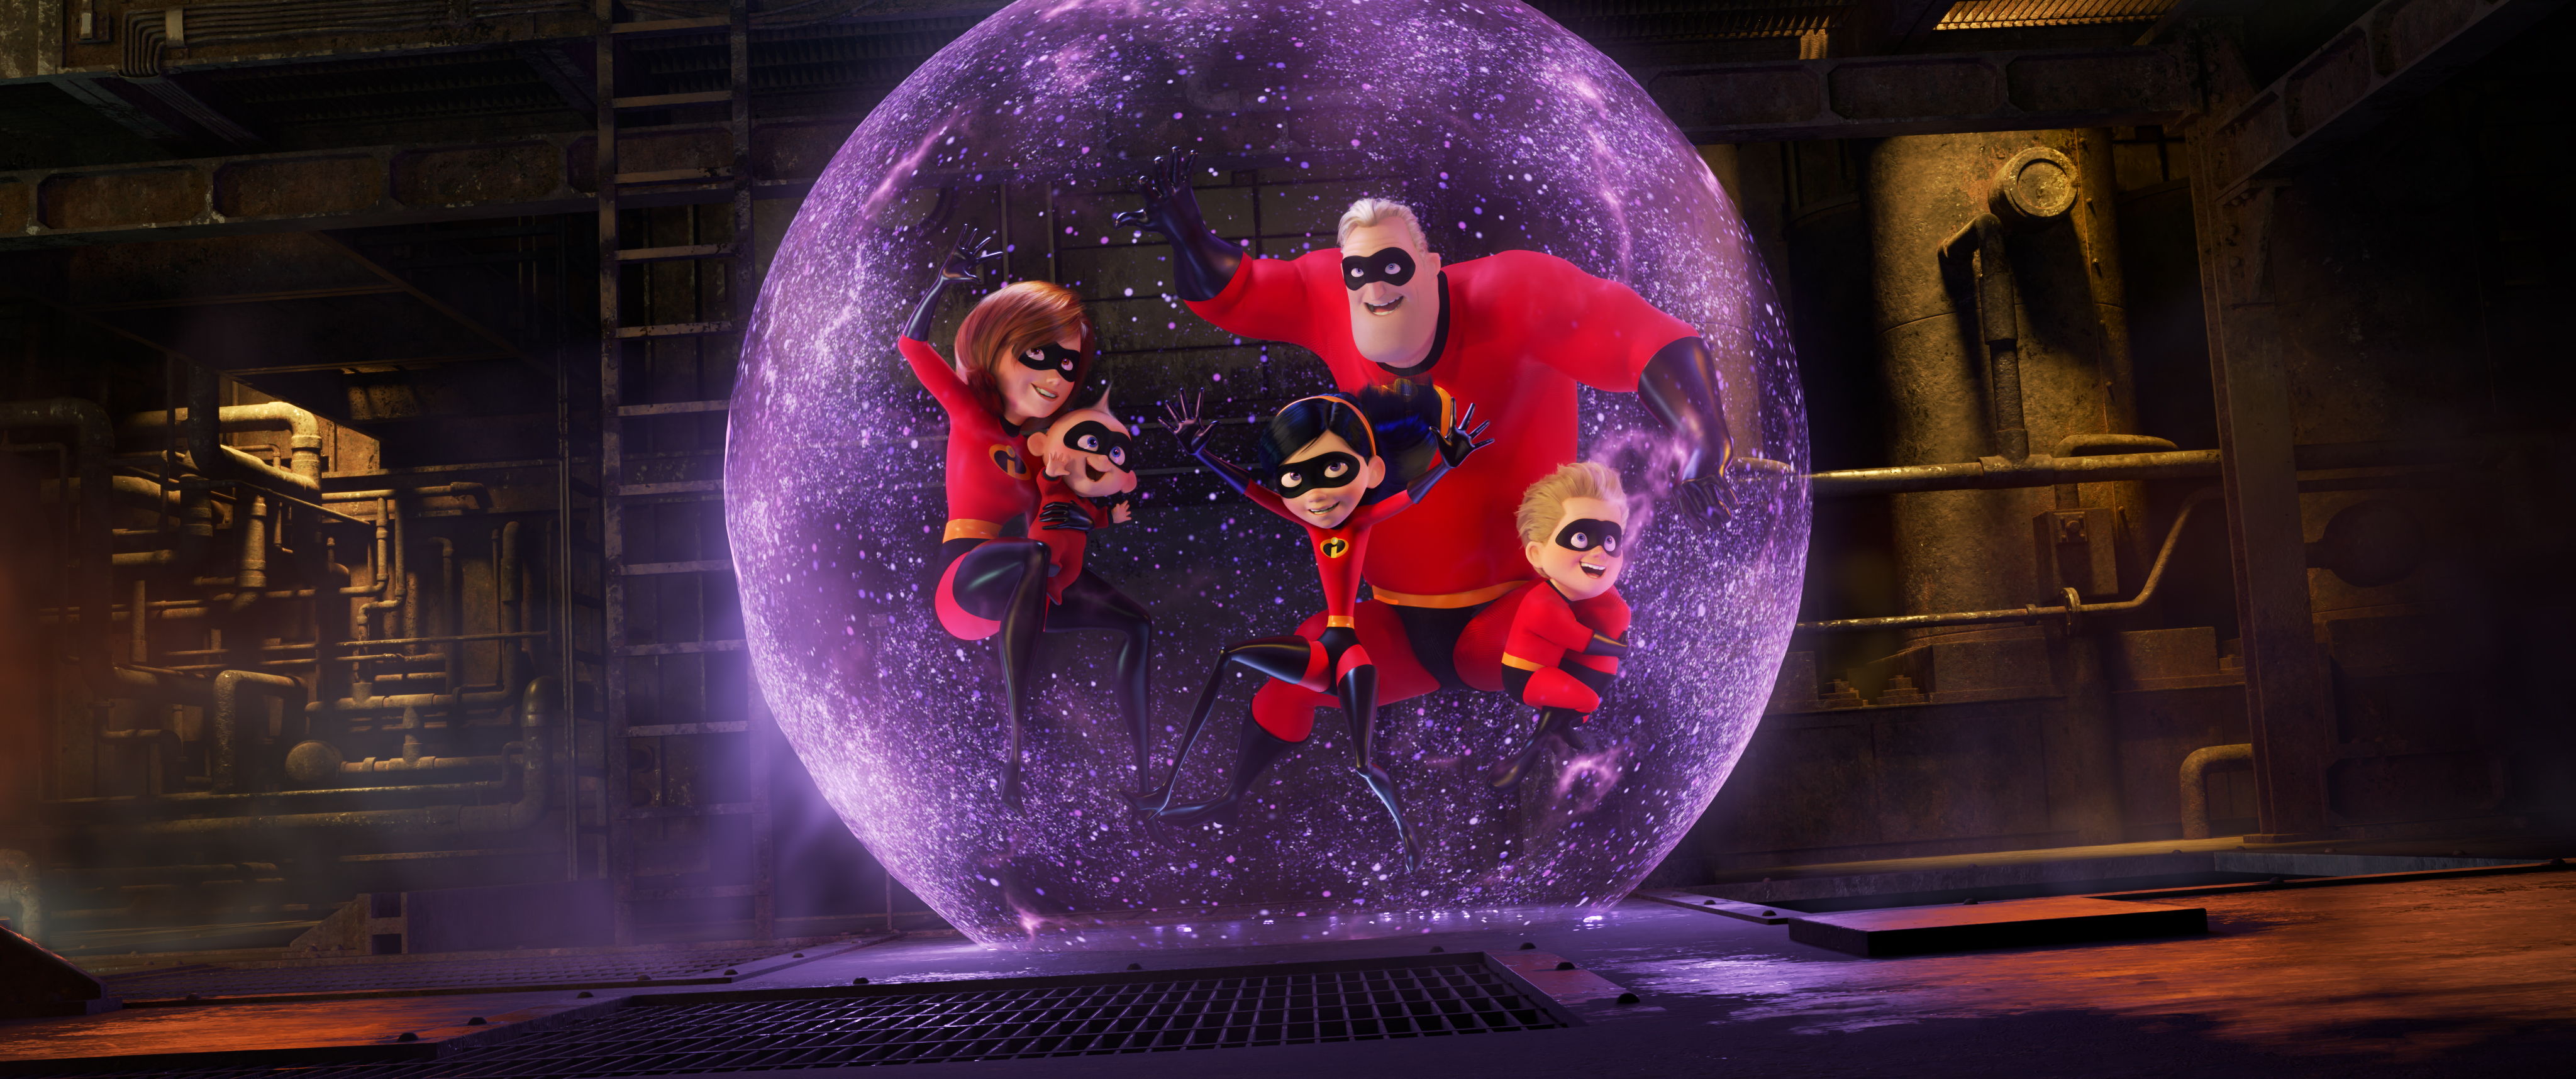 PRACTICE MAKES PERFECT - In the midst of battling the Underminer villain, Violet protects her family by throwing one of her most super force fields yet. Featuring Sarah Vowell as the voice of Violet, Holly Hunter as the voice of Helen, Craig T. Nelson as the voice of Bob and Huck Milner as the voice of Dash, DisneyPixar's "Incredibles 2" busts into theaters on June 15, 2018. ©2018 DisneyPixar. All Rights Reserved.